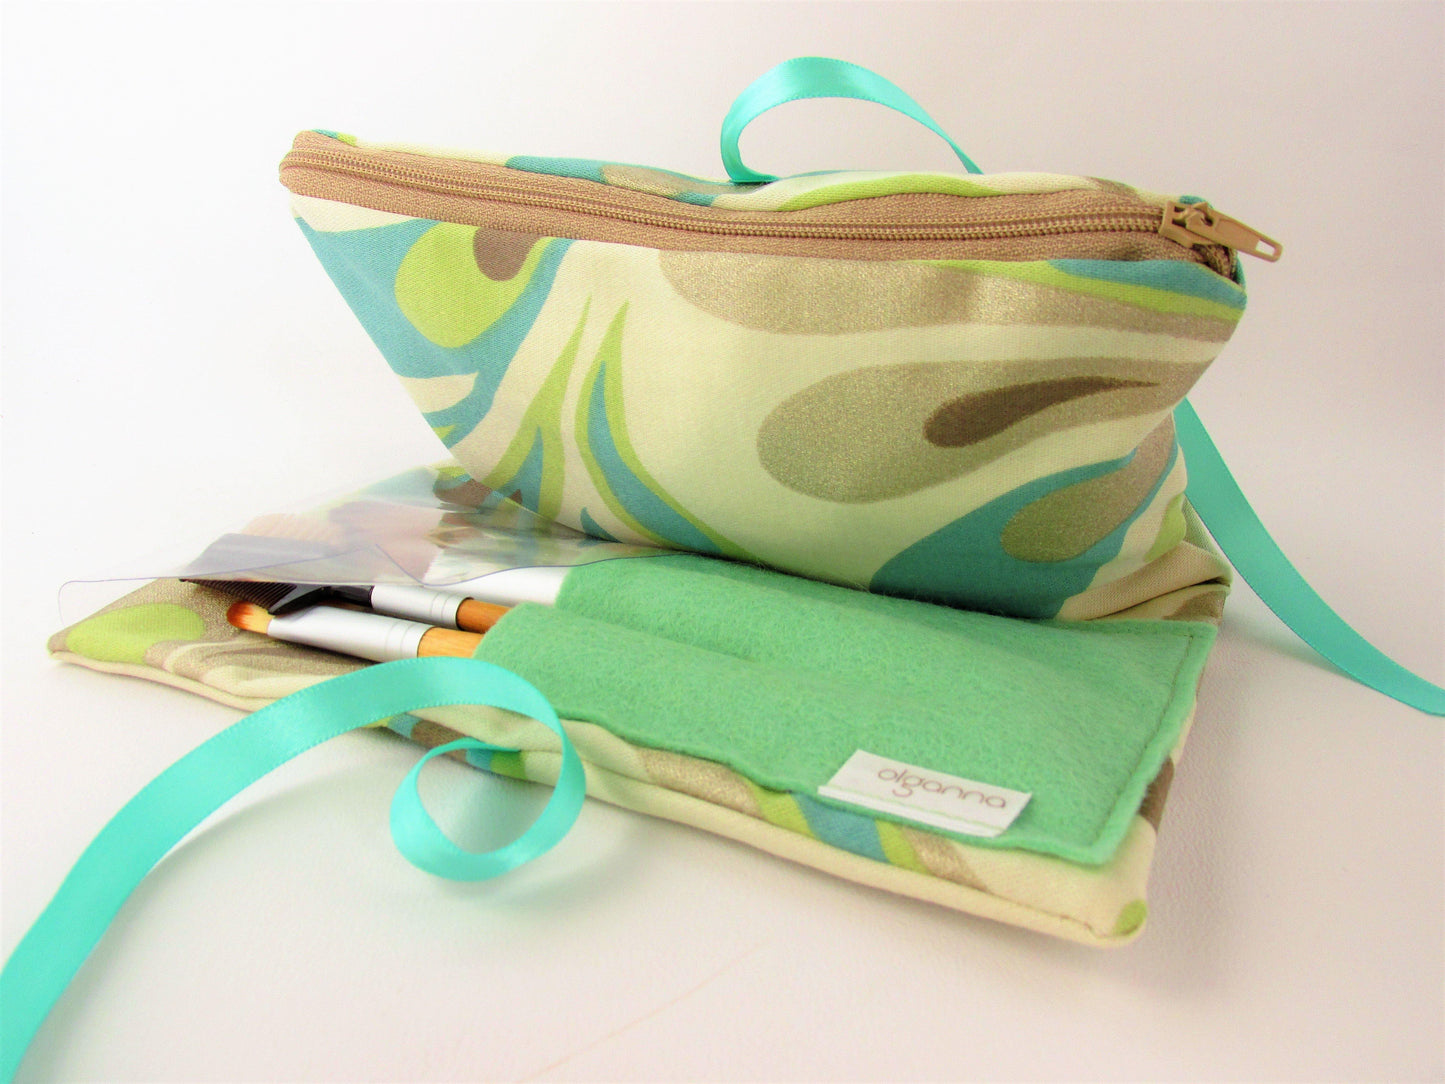 Make Up Bag Set, Make up bag with brushes Holder, Toiletry bag for ladies, What to get my daughter? Practical Gift, Aqua Swirl - Olganna